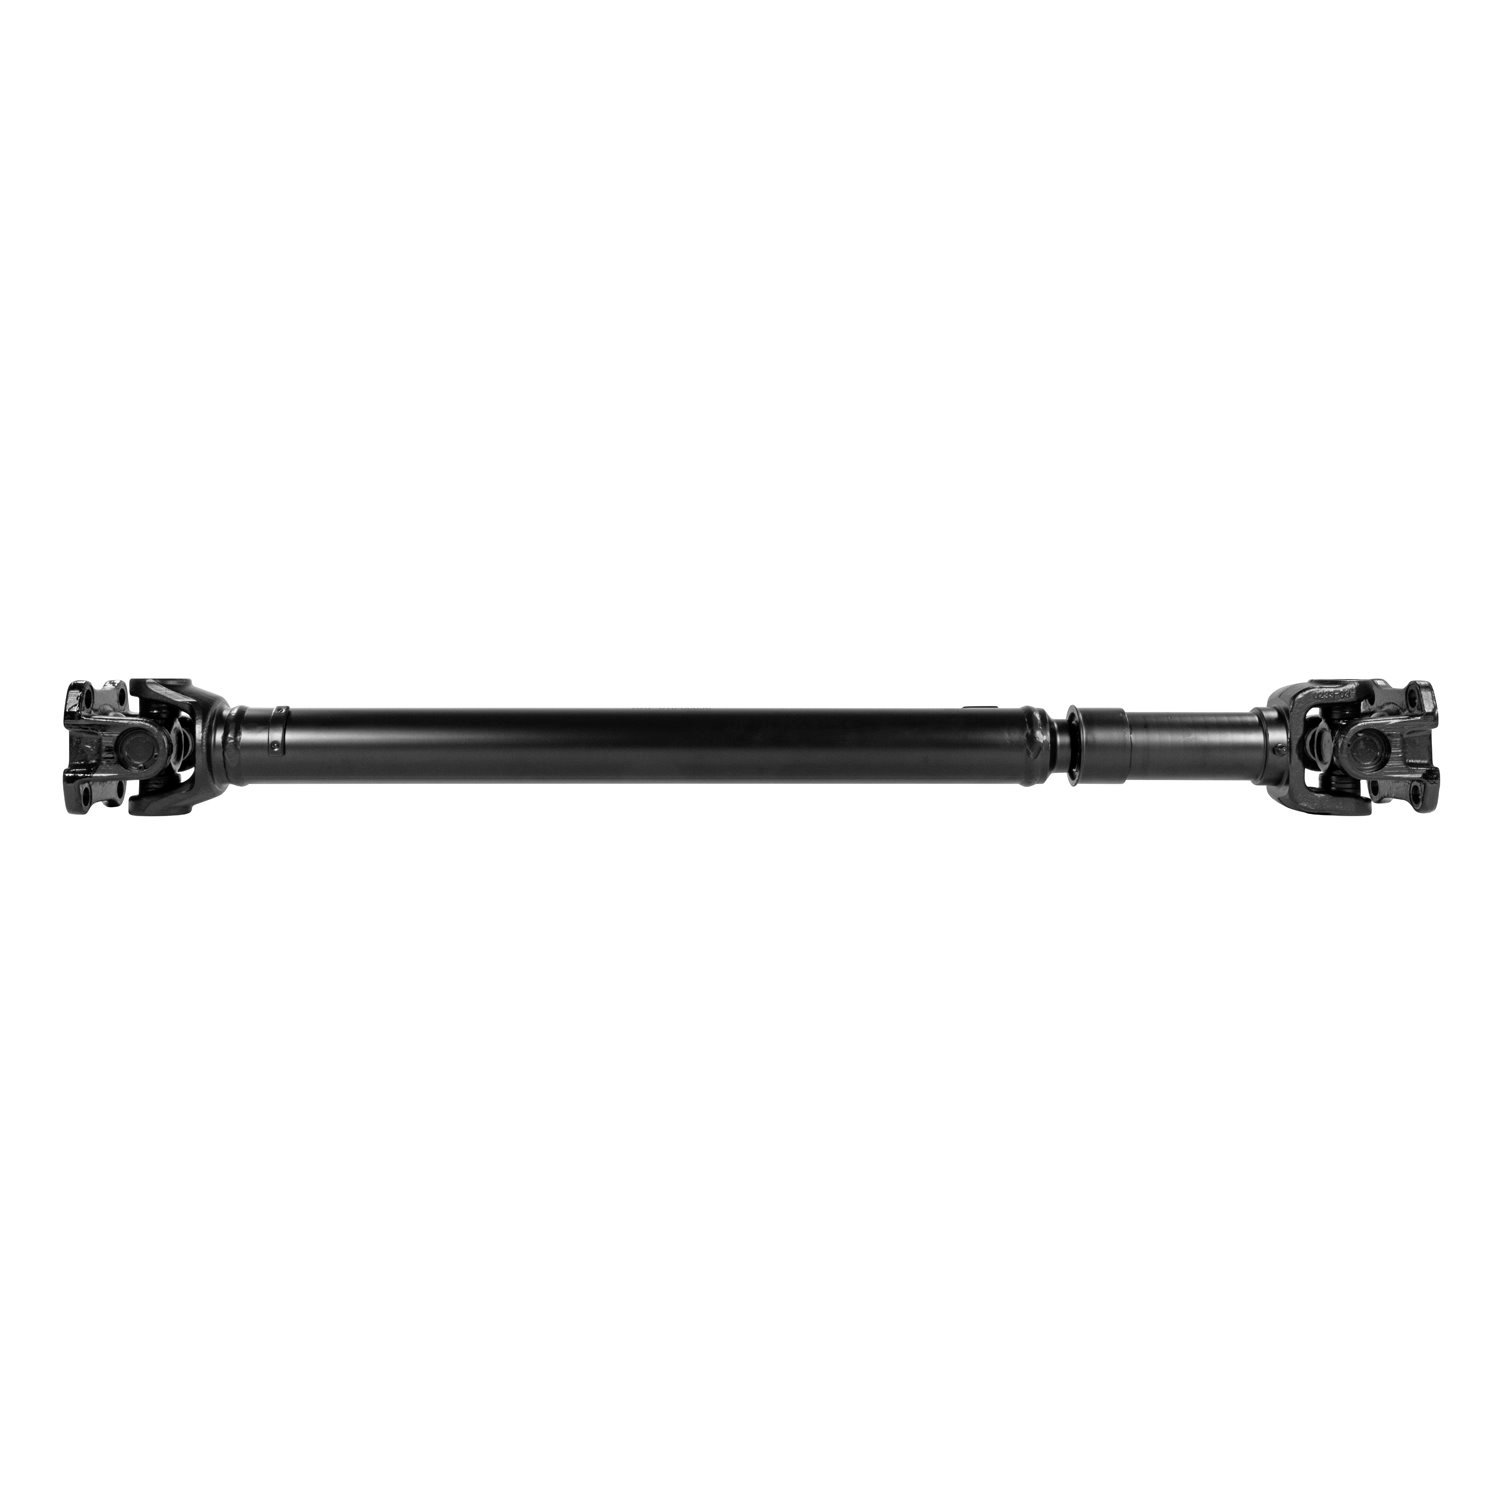 USA Standard ZDS9544 Front Driveshaft, For F150 & F250, 34-1/2 in. Flange To Flange